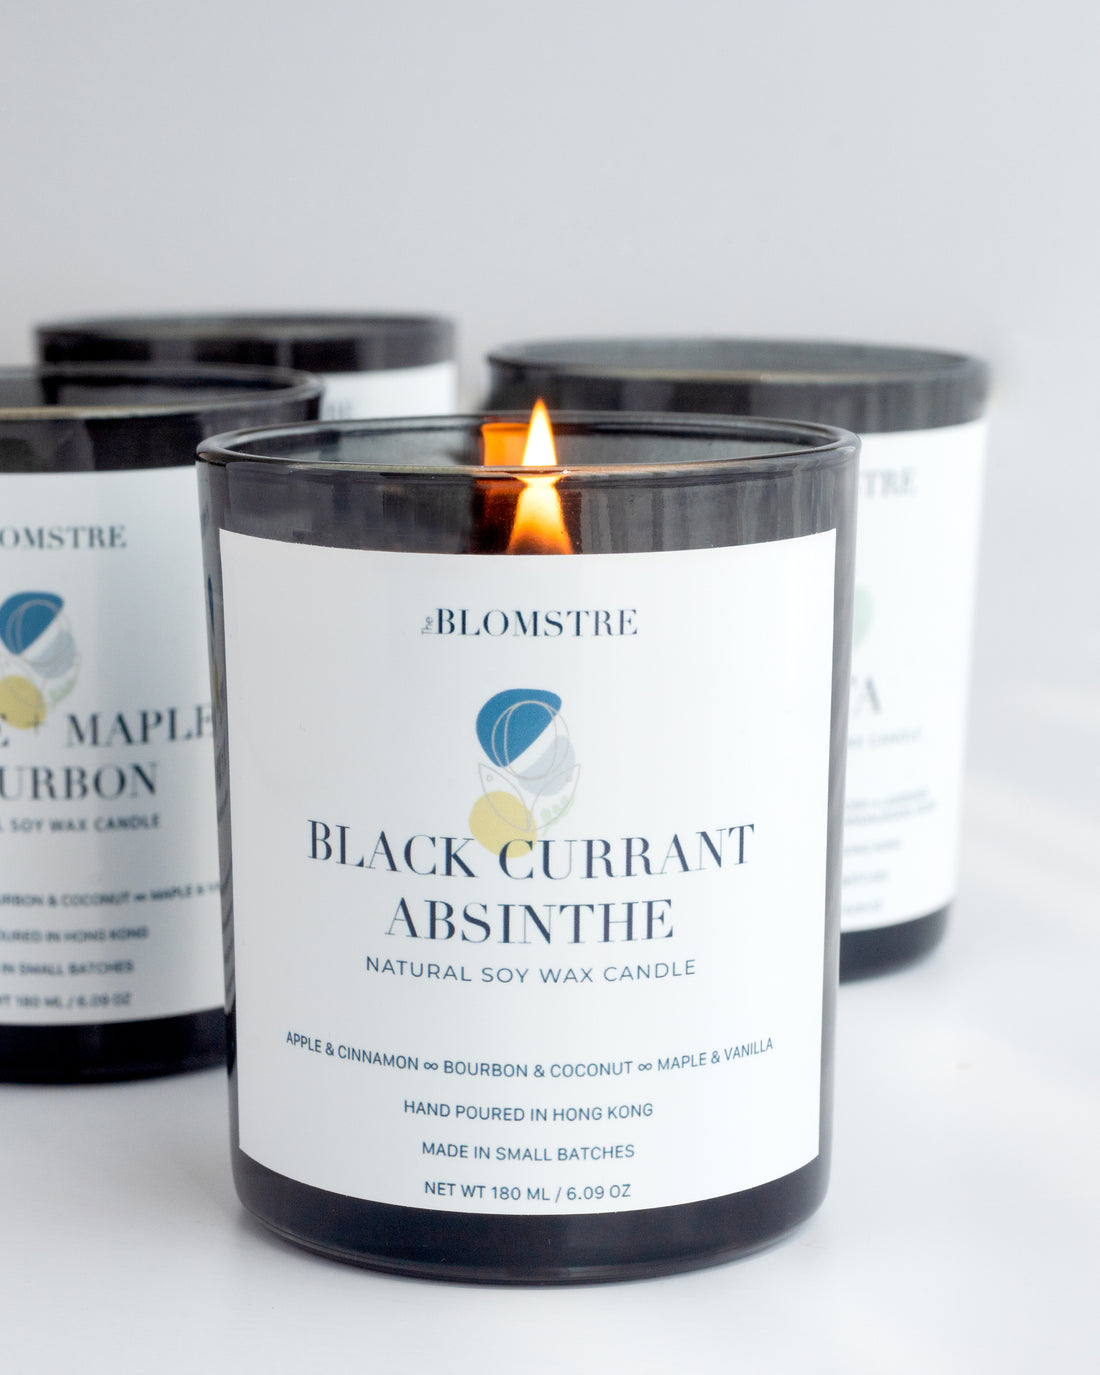 THE BLOMSTRE｜Soy Candle 180ml: BLACK CURRANT ABSINTHE - N°6